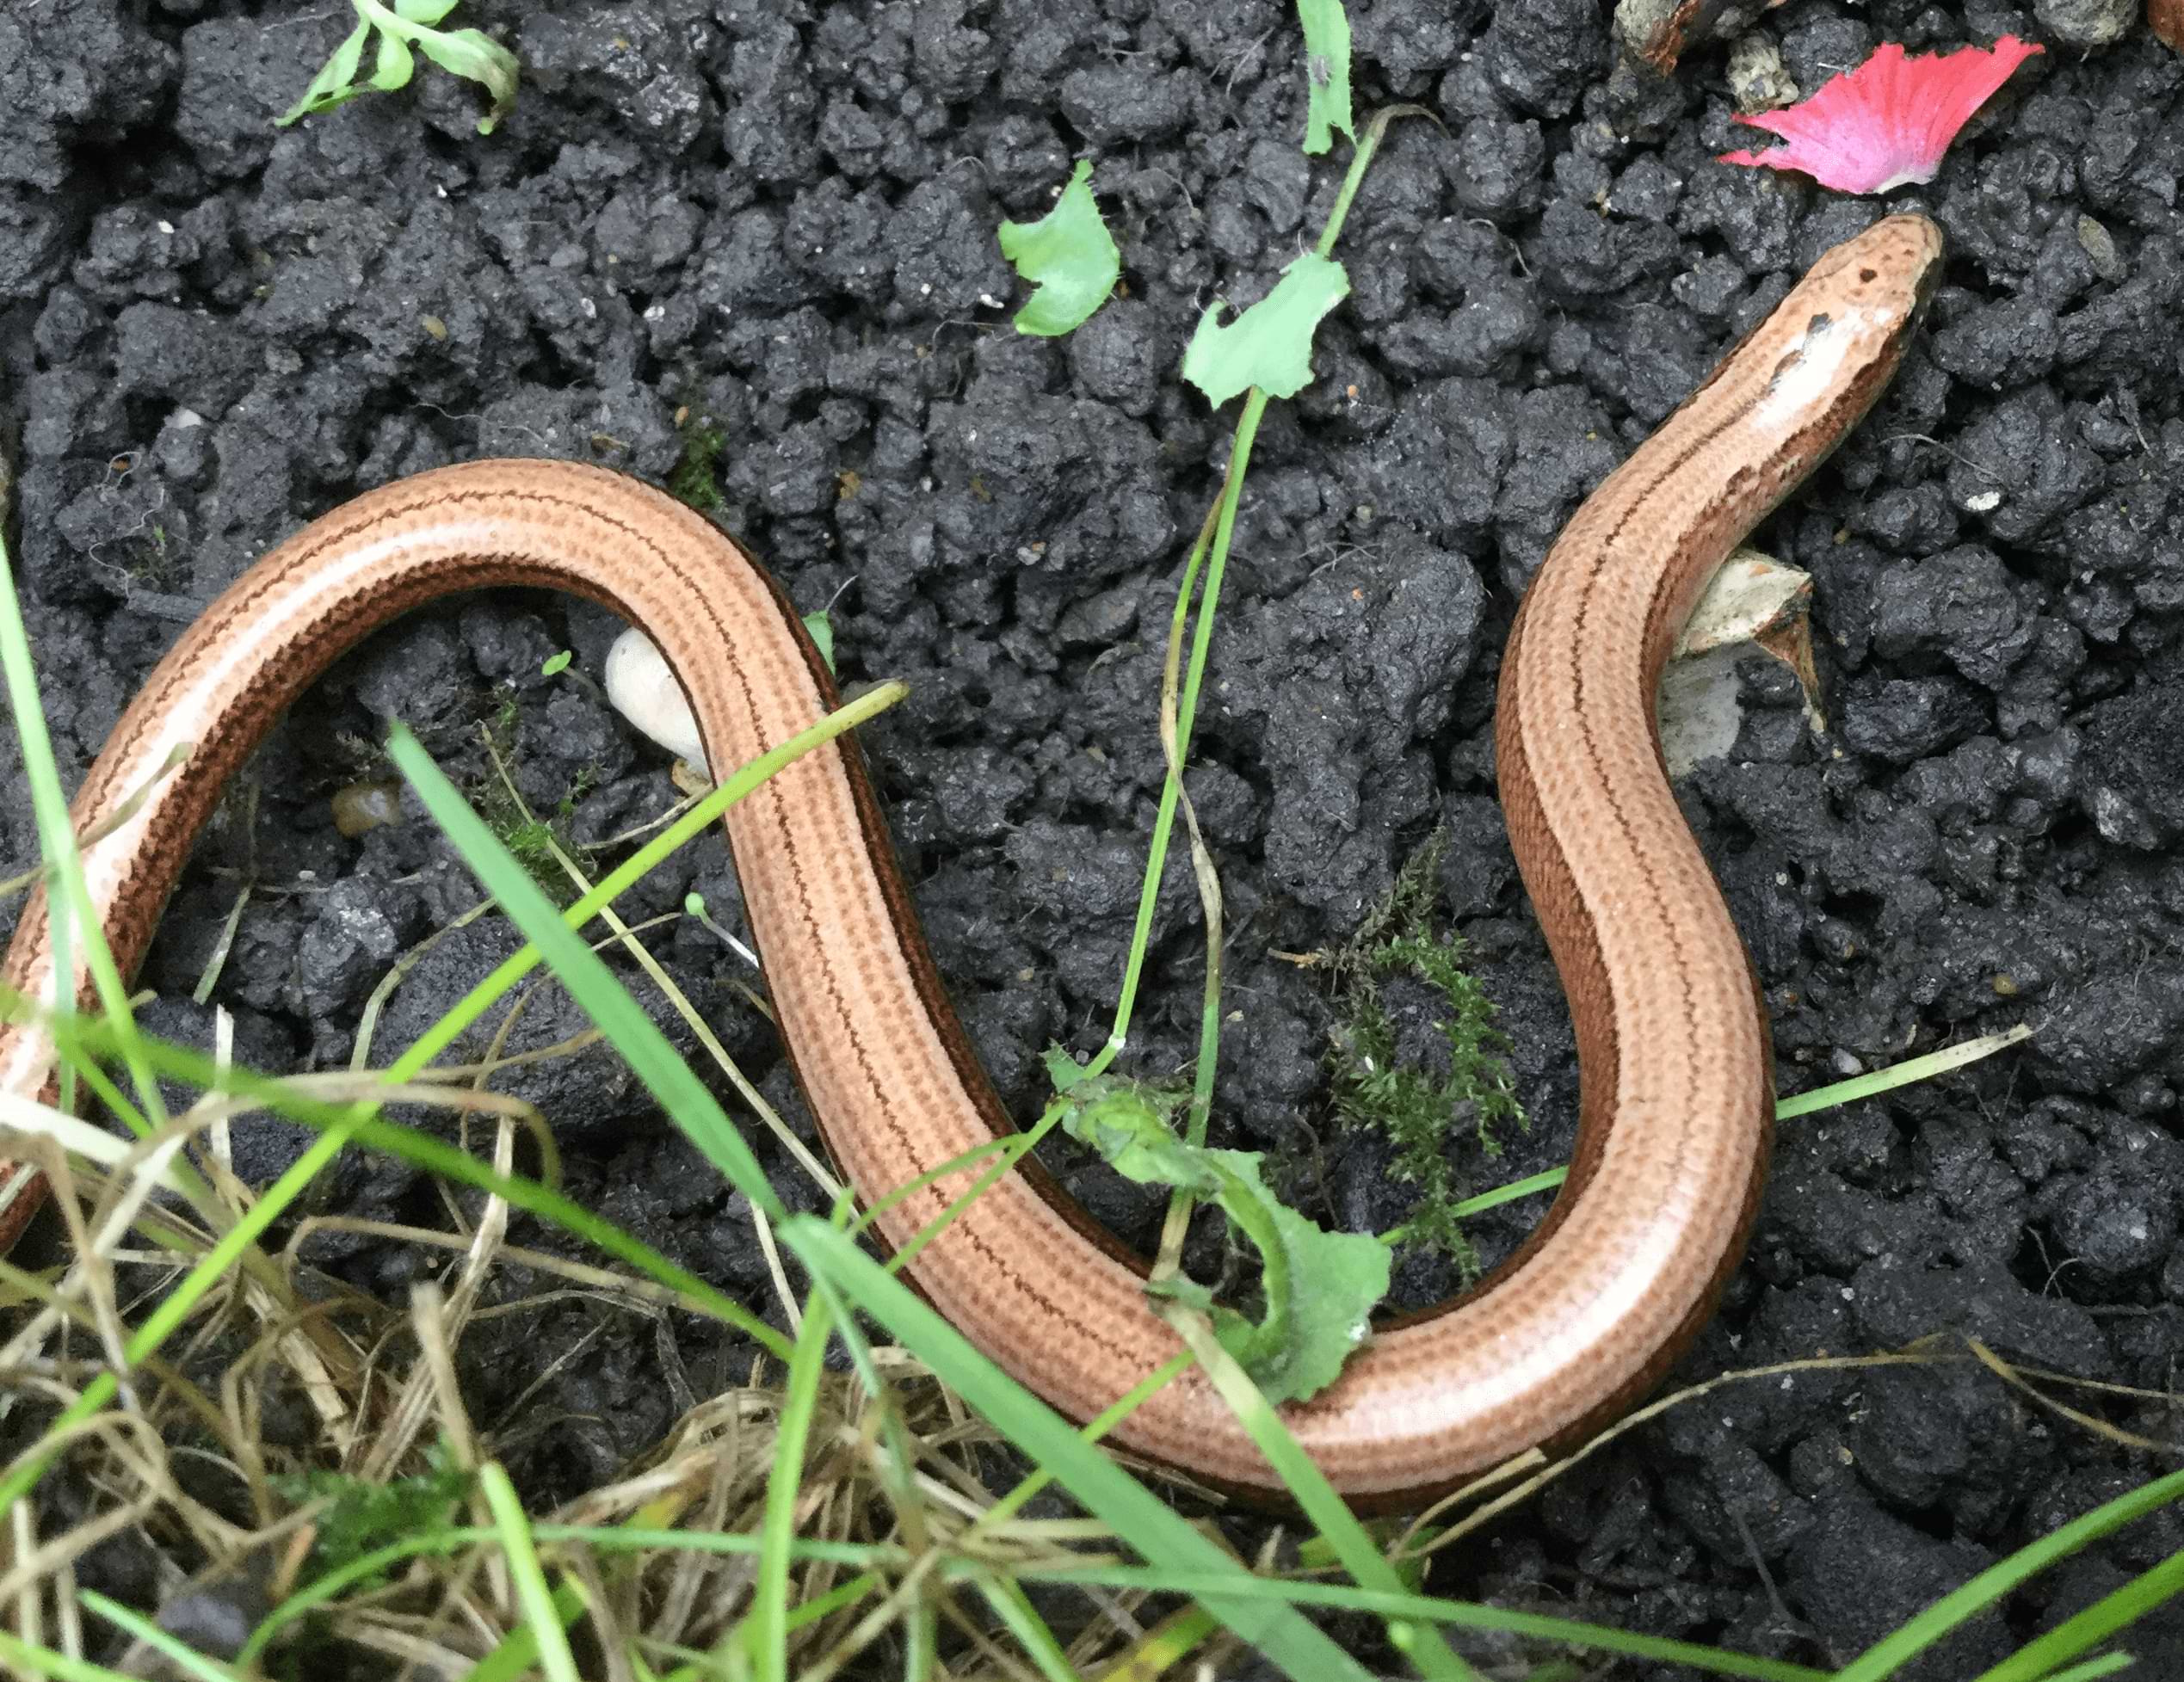 A photo of a small snake-like lizard gliding on top of some soil. It is bronze in colour and has thin black markings running down the middle of its back.